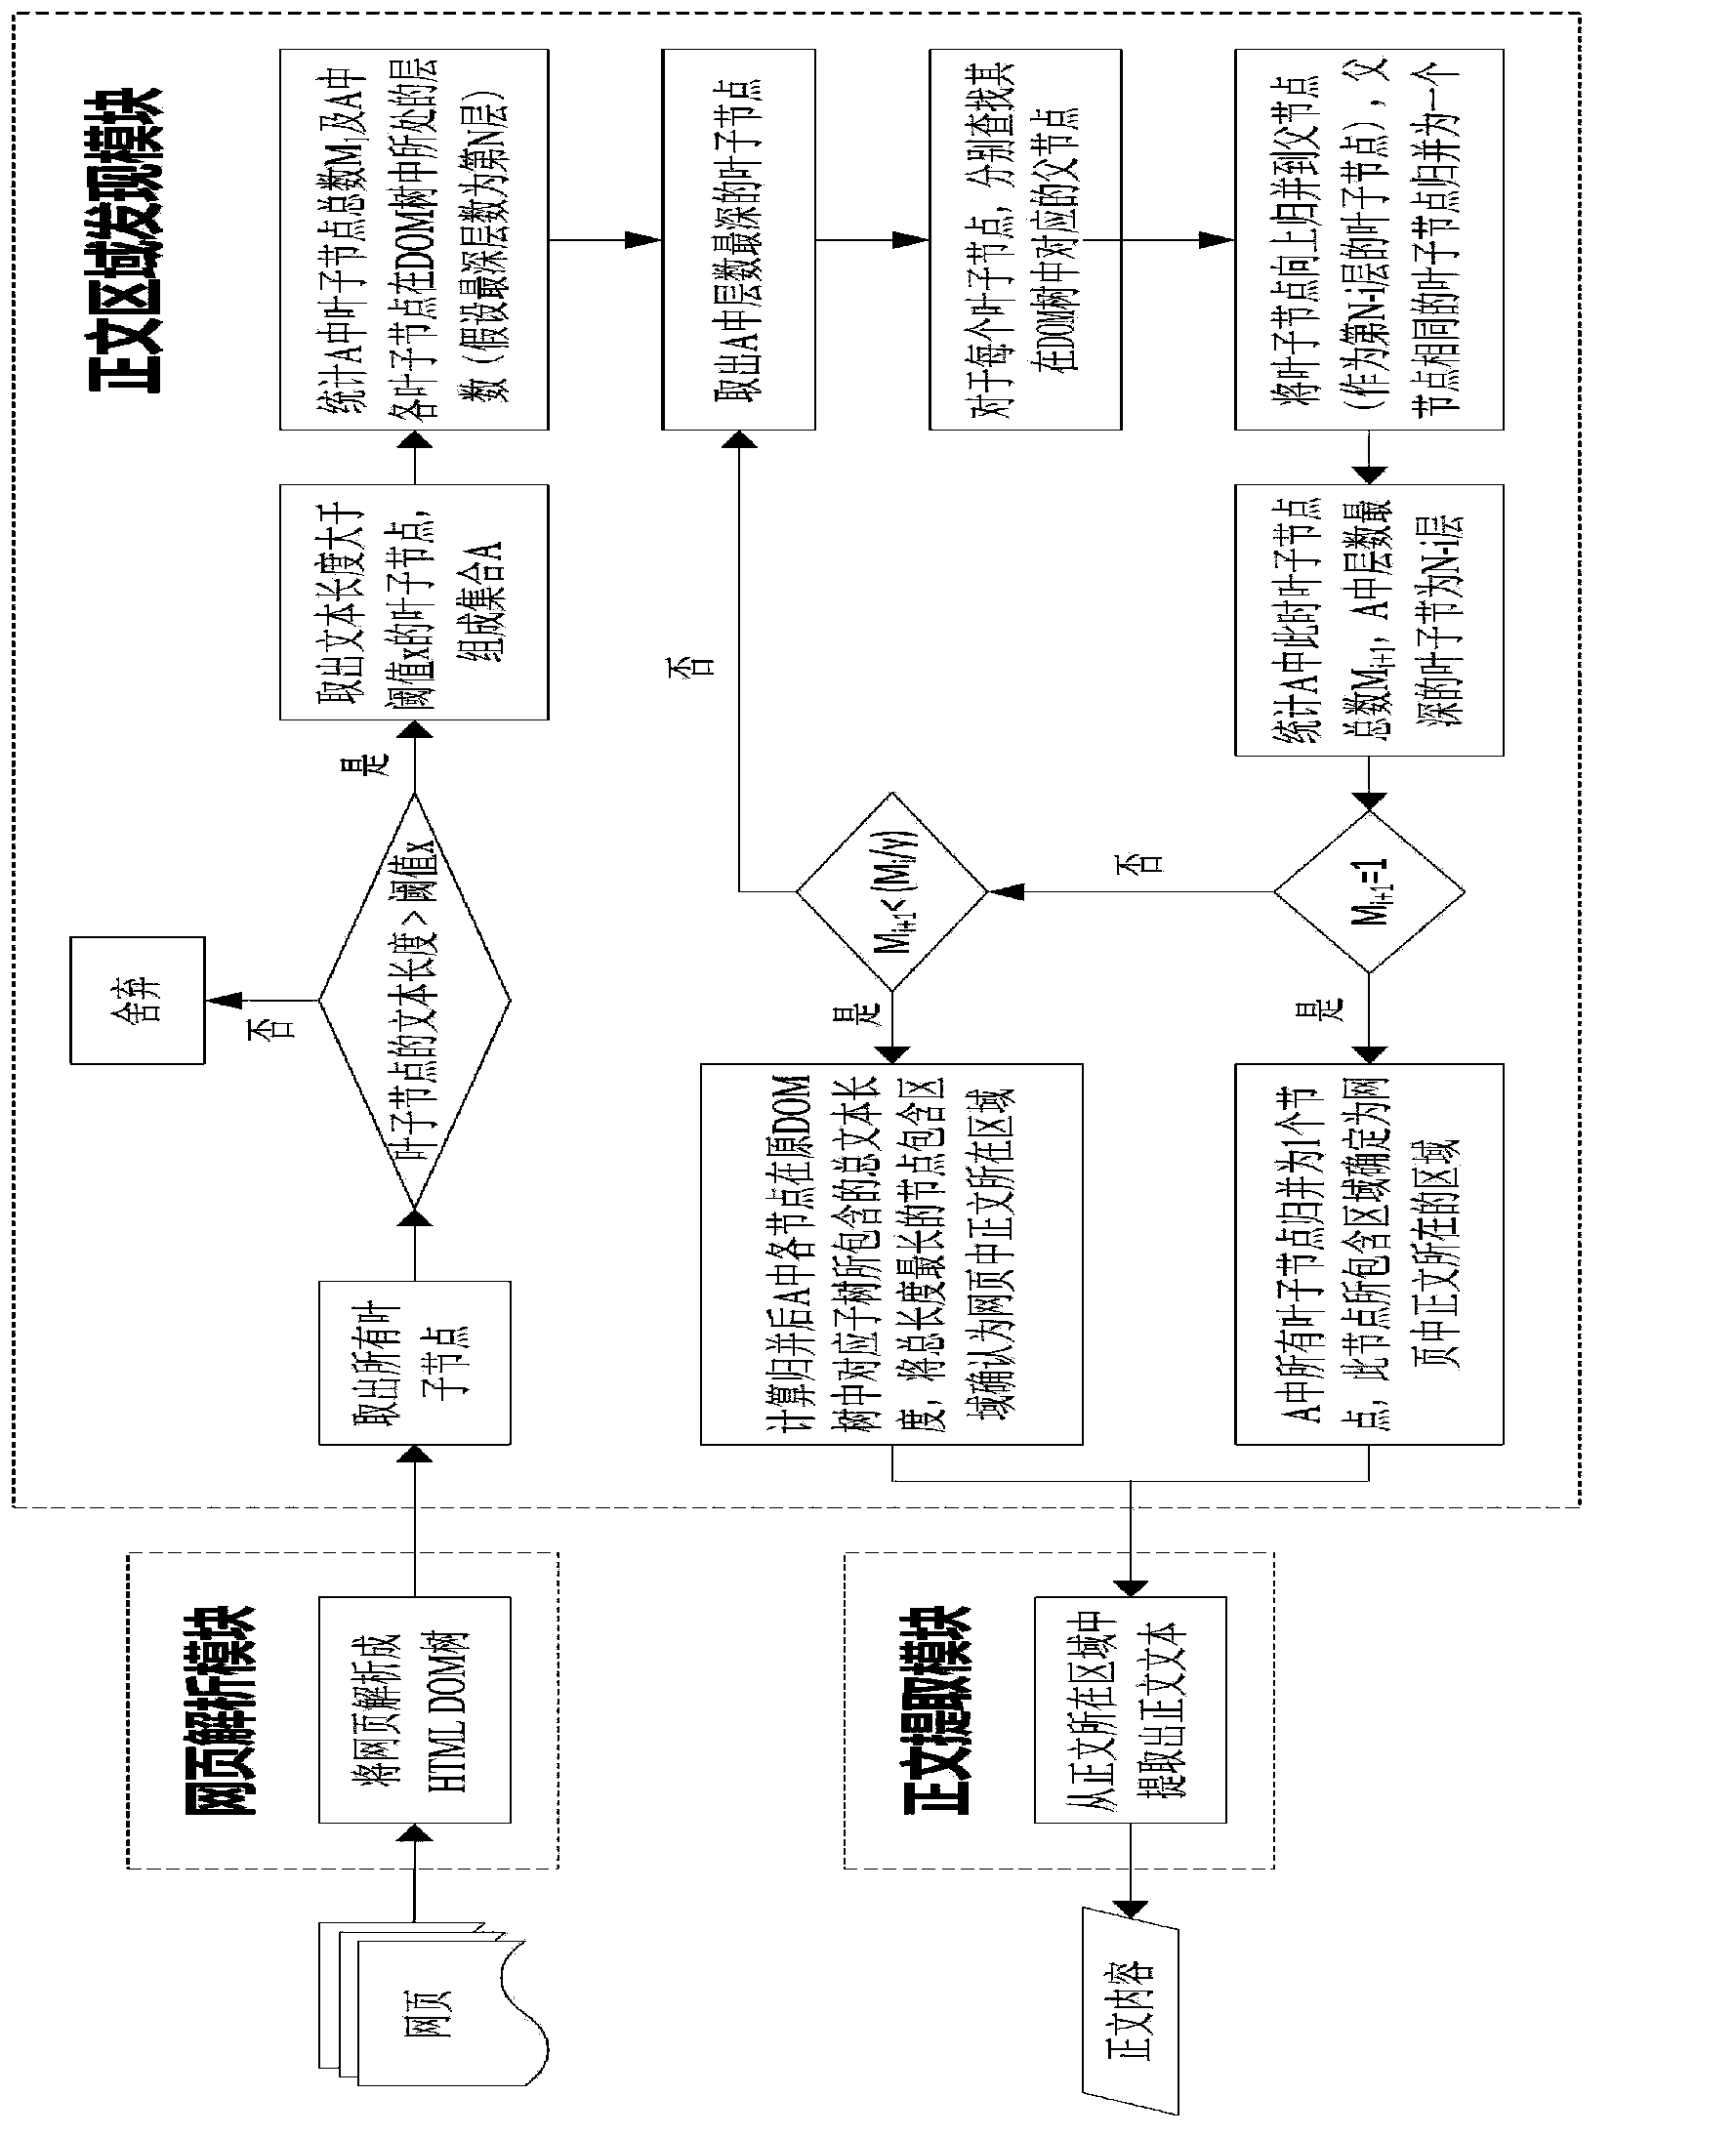 Method and device for extracting contents of bodies of web pages